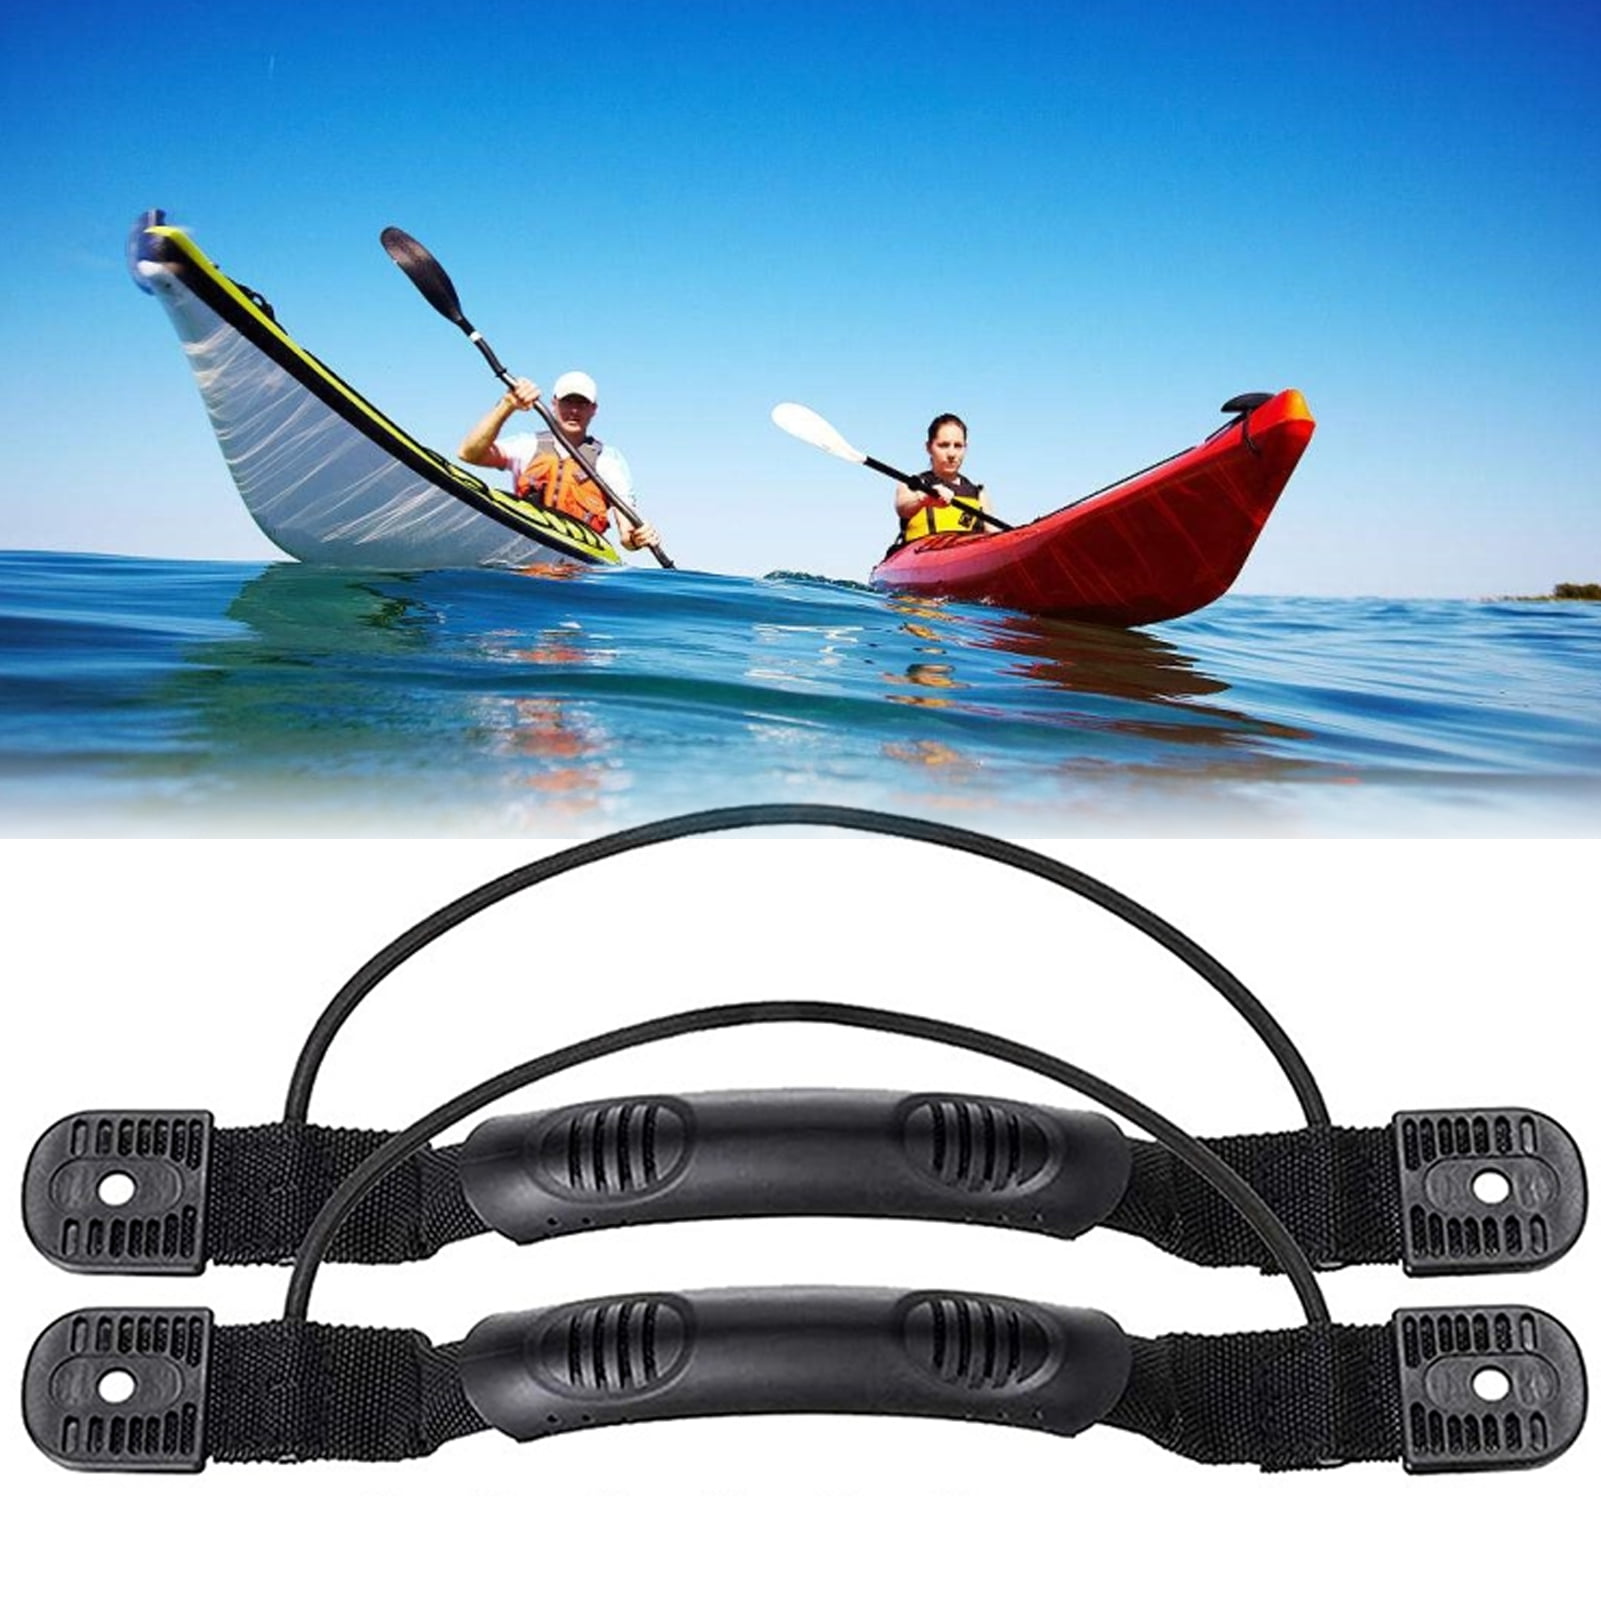 Kayak Canoe Fishing Boat Side Mount Carry Grab Handle & Bungee Cord Accessories 